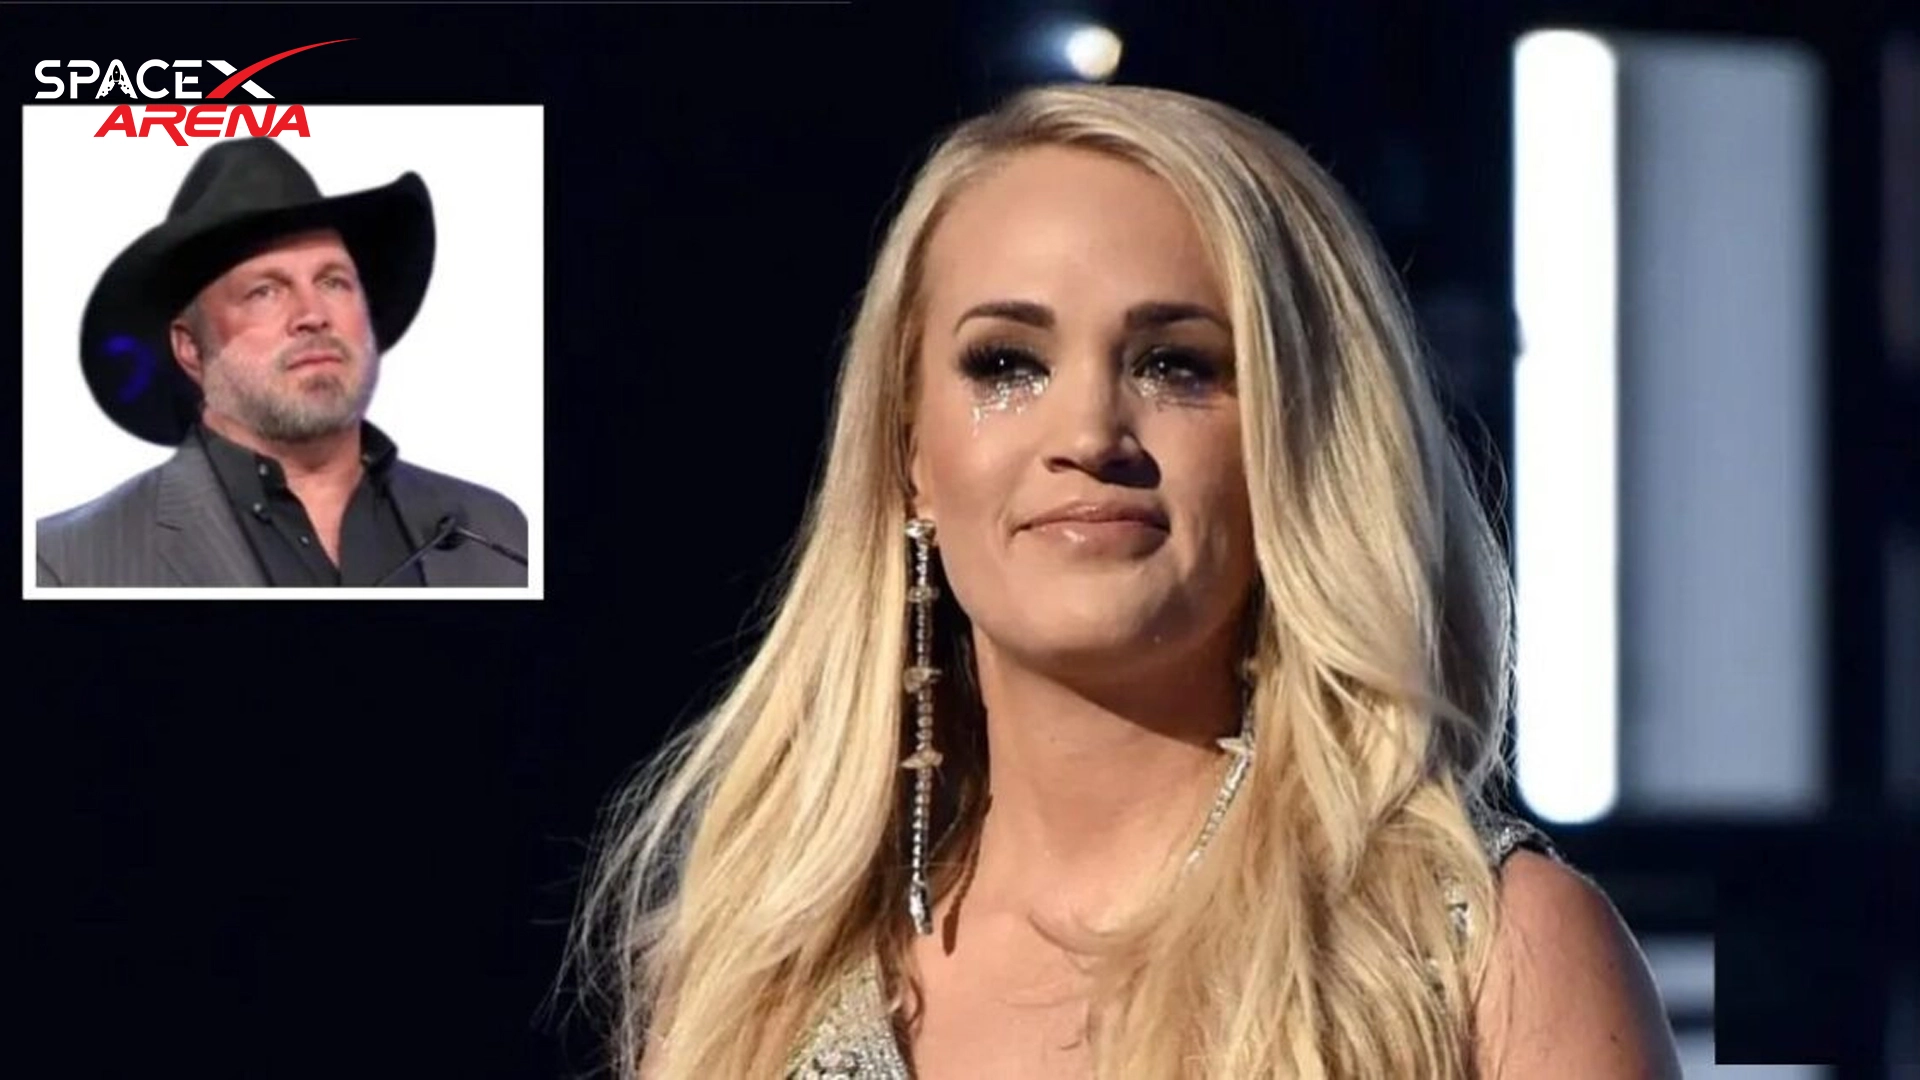 Im-Tired-of-the-Booing-Carrie-Underwood-Announces-the-Cancellation-of-Her-Entire-Tour-With-Garth-Brooks.